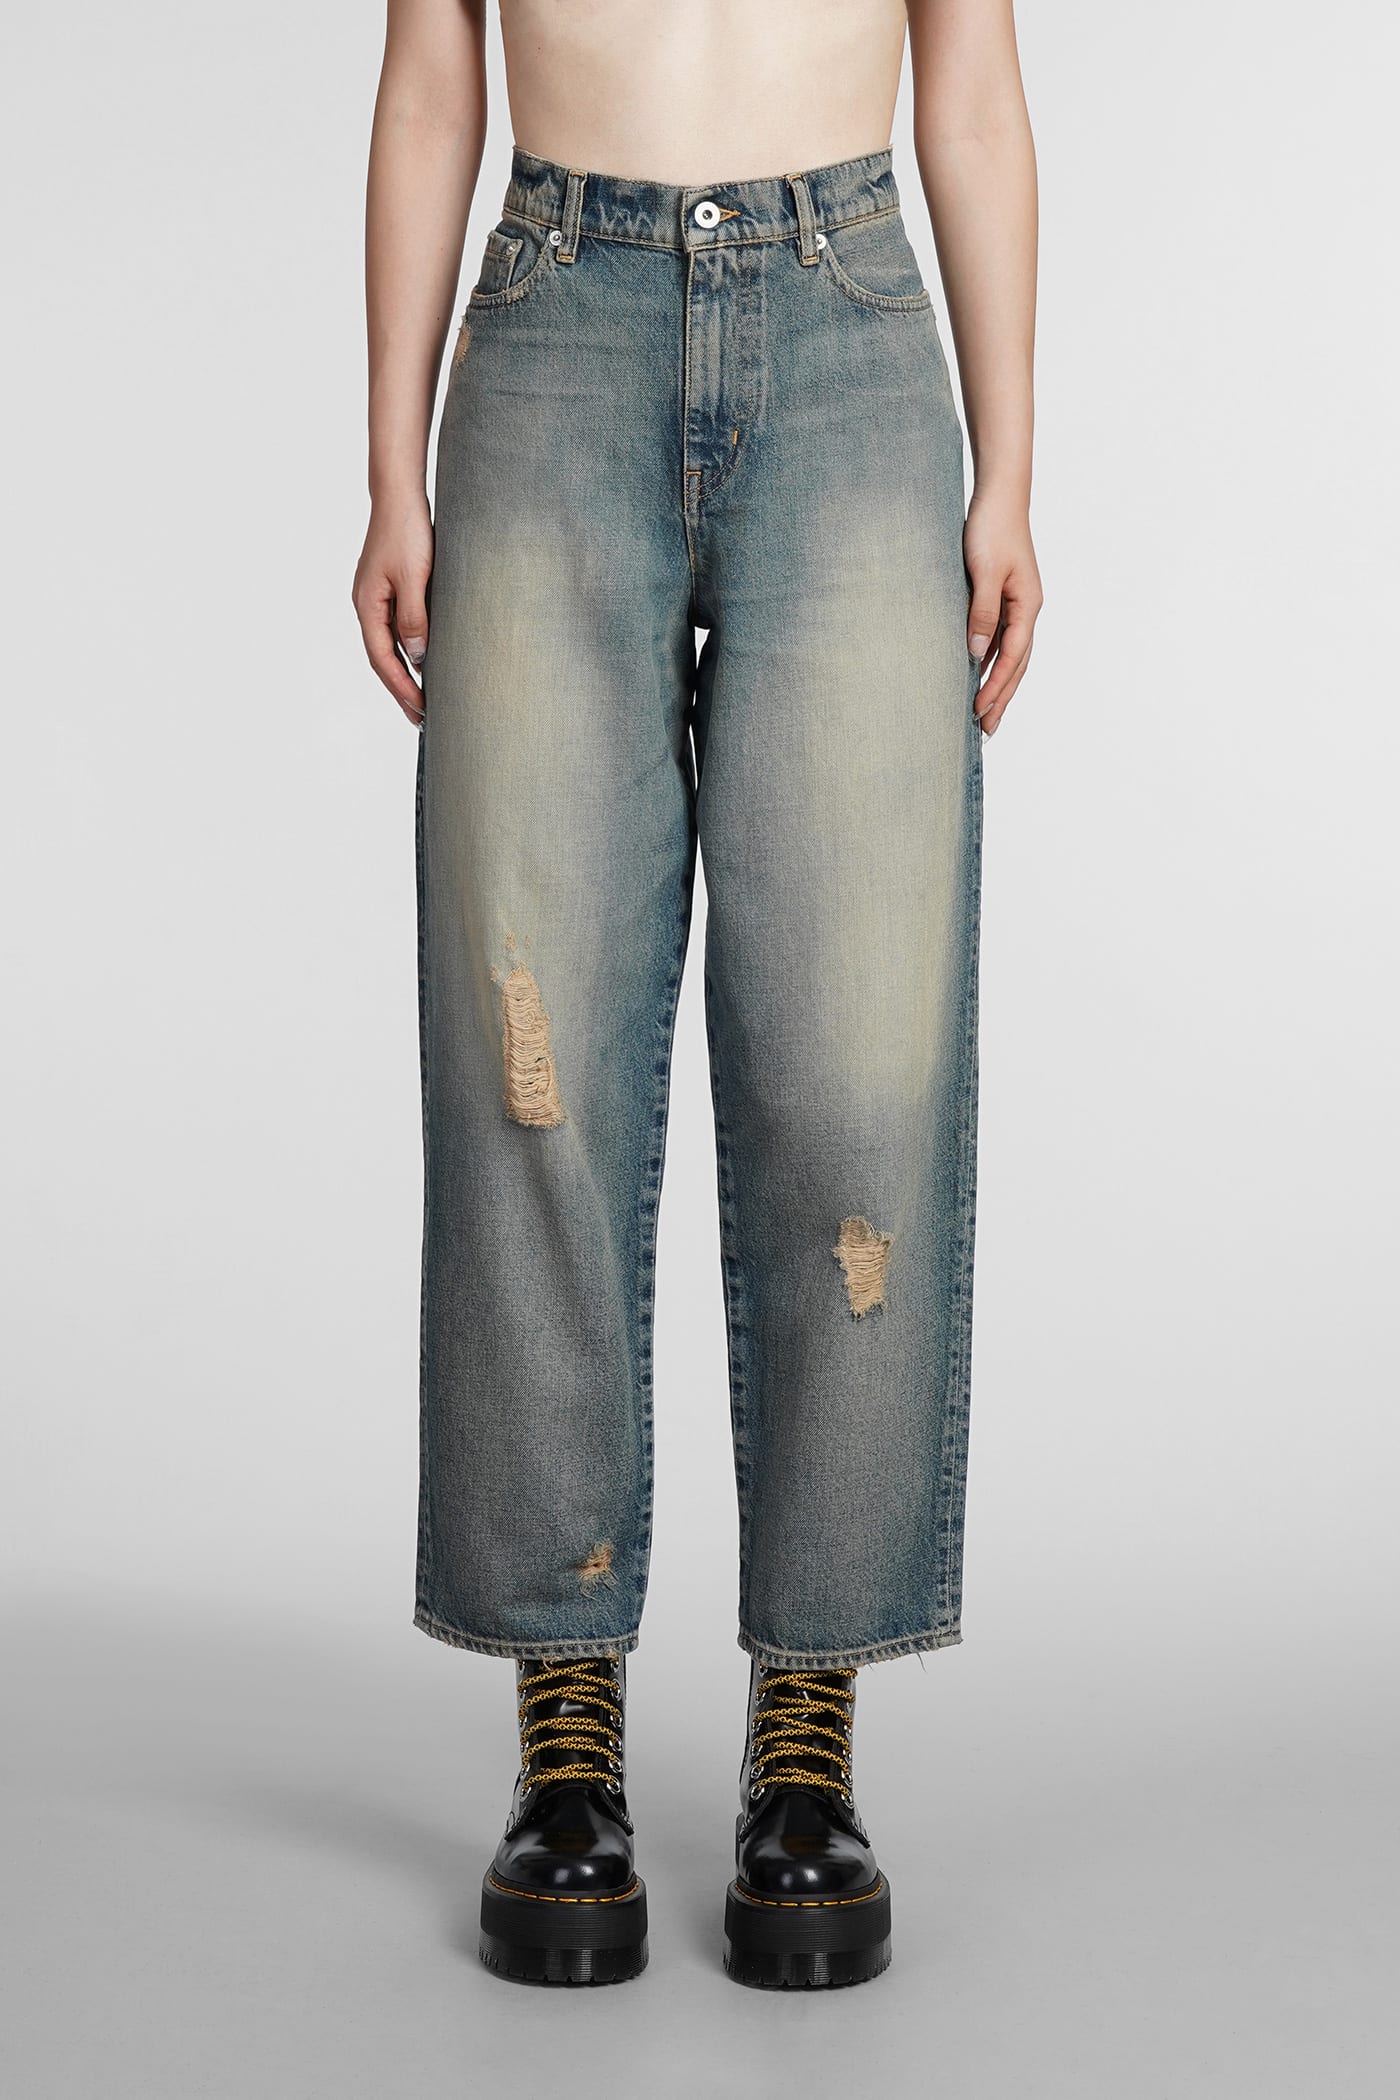 KENZO JEANS IN BLUE COTTON